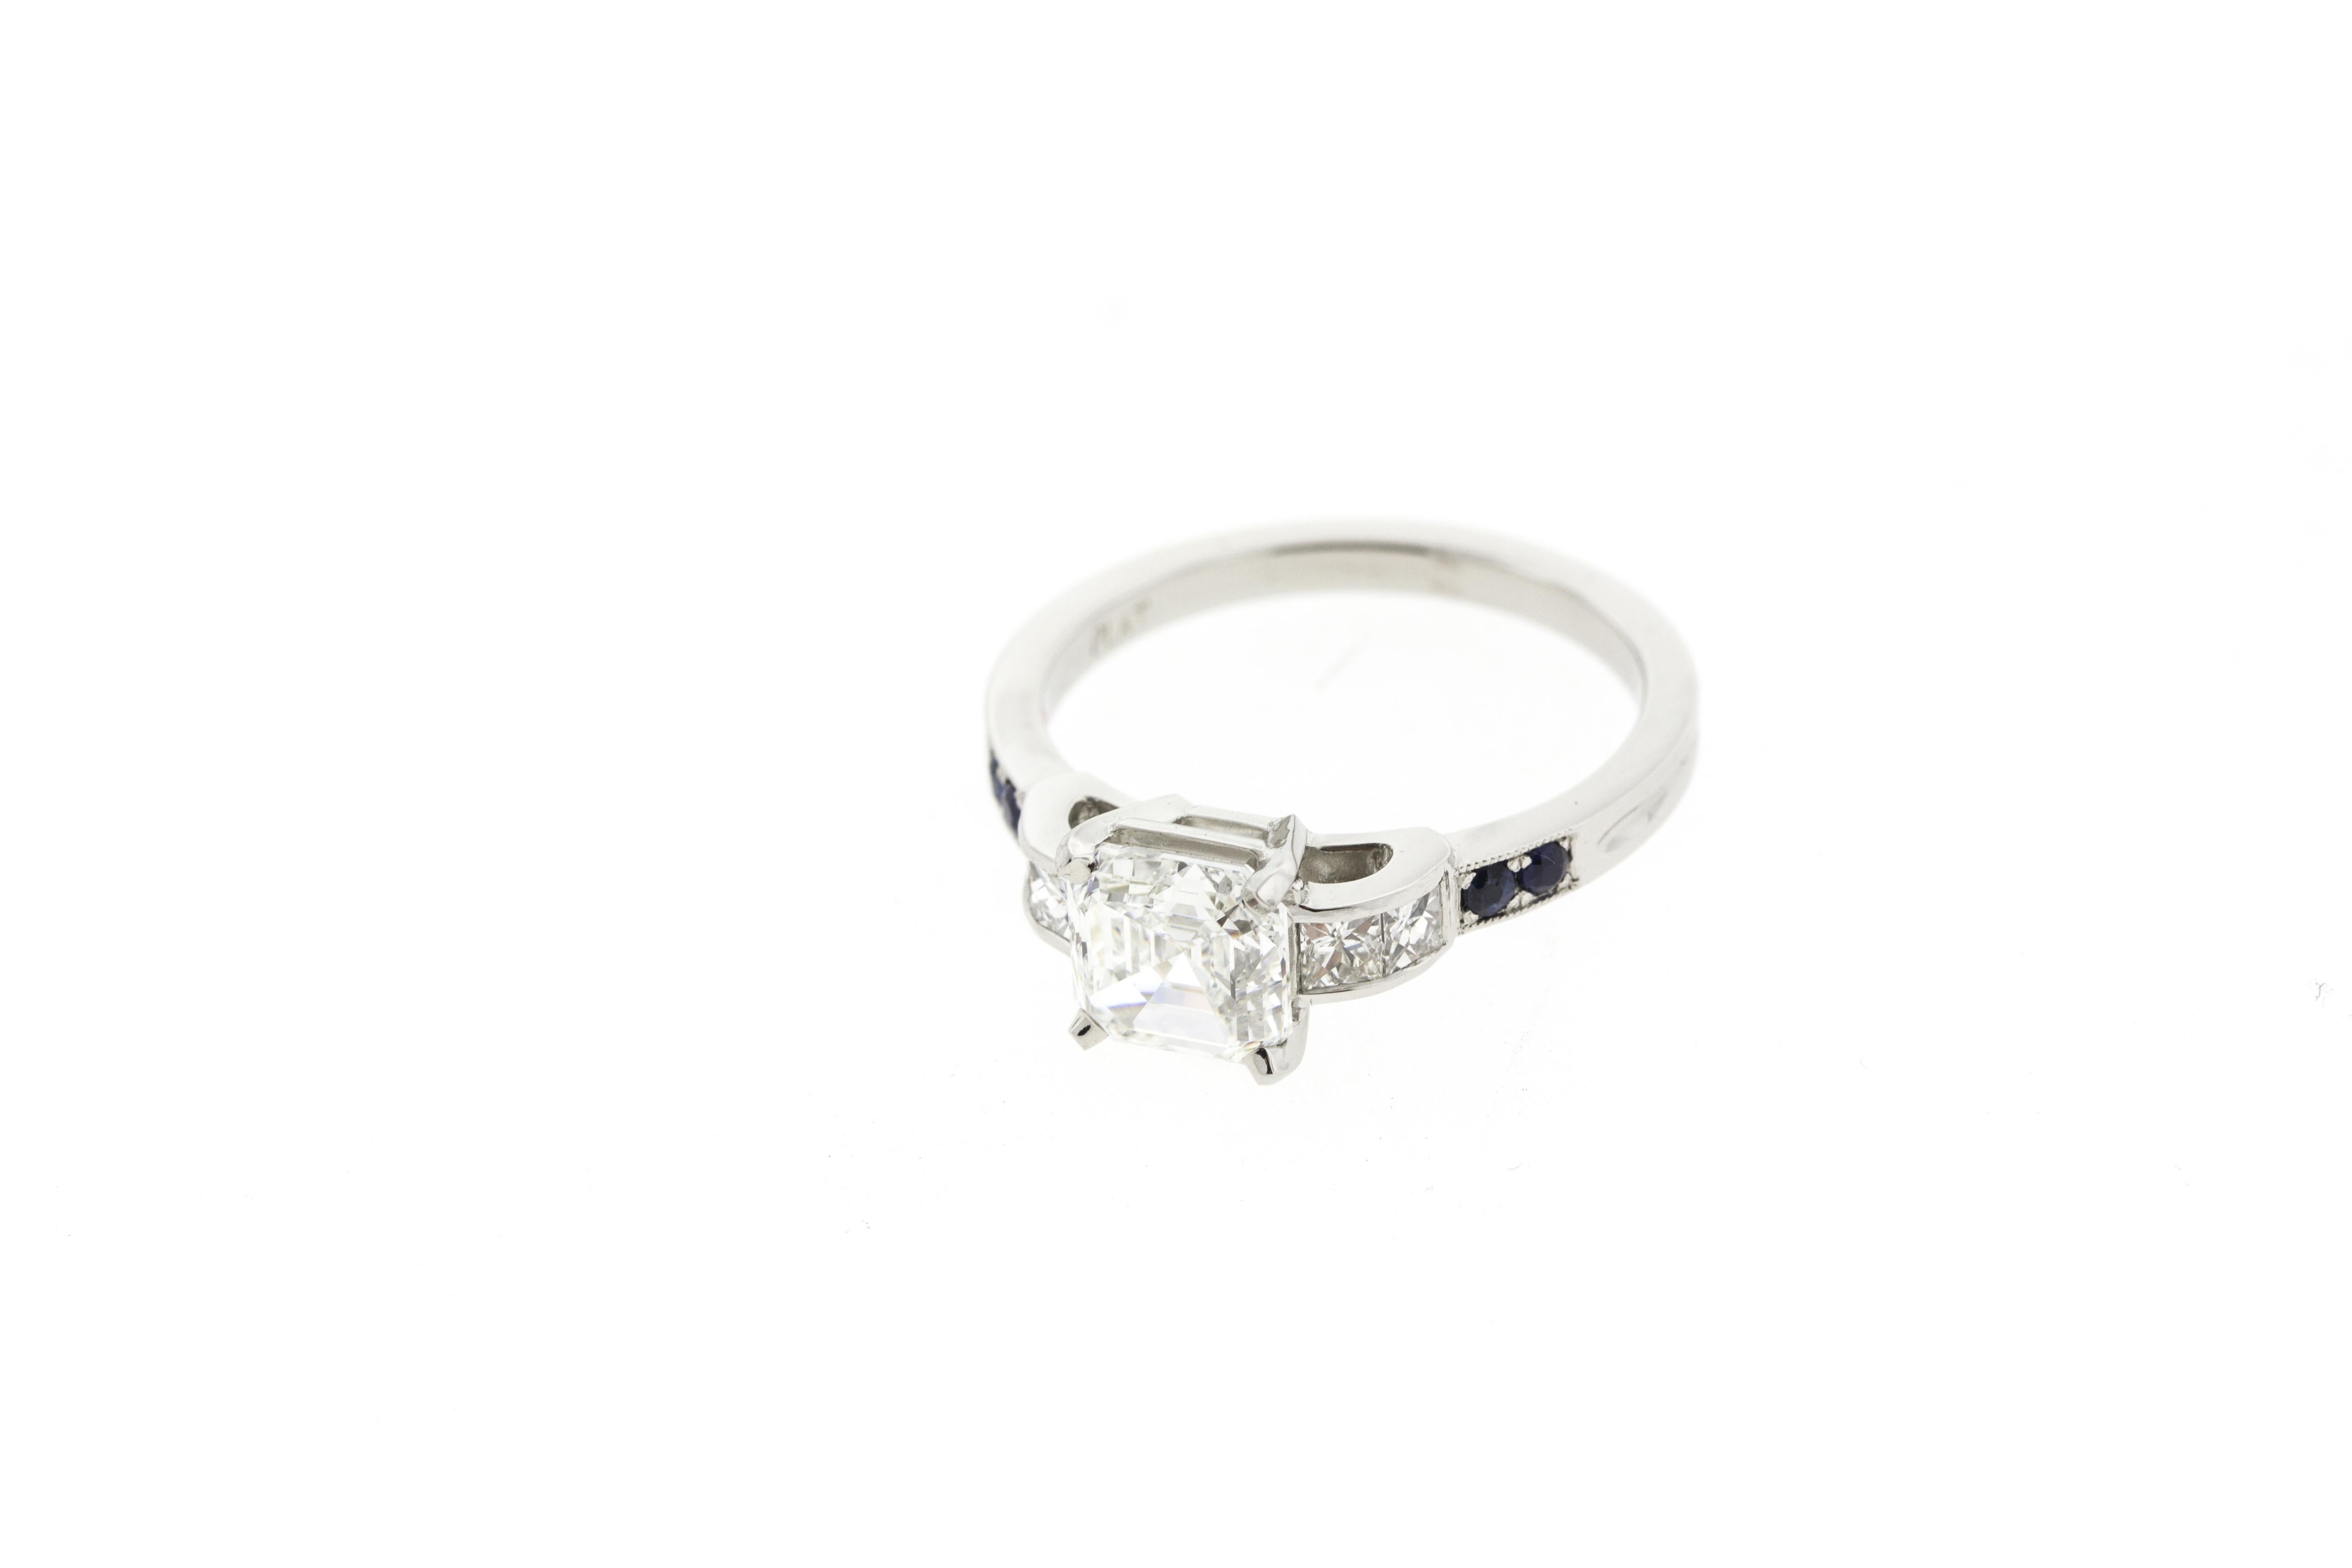 This asscher diamond engagement ring is made in platinum and features four additional channel-set side diamonds as well as four deep blue sapphires. A raised gallery and milgraine accents make this beautiful ring a must-have. 

Please note that each